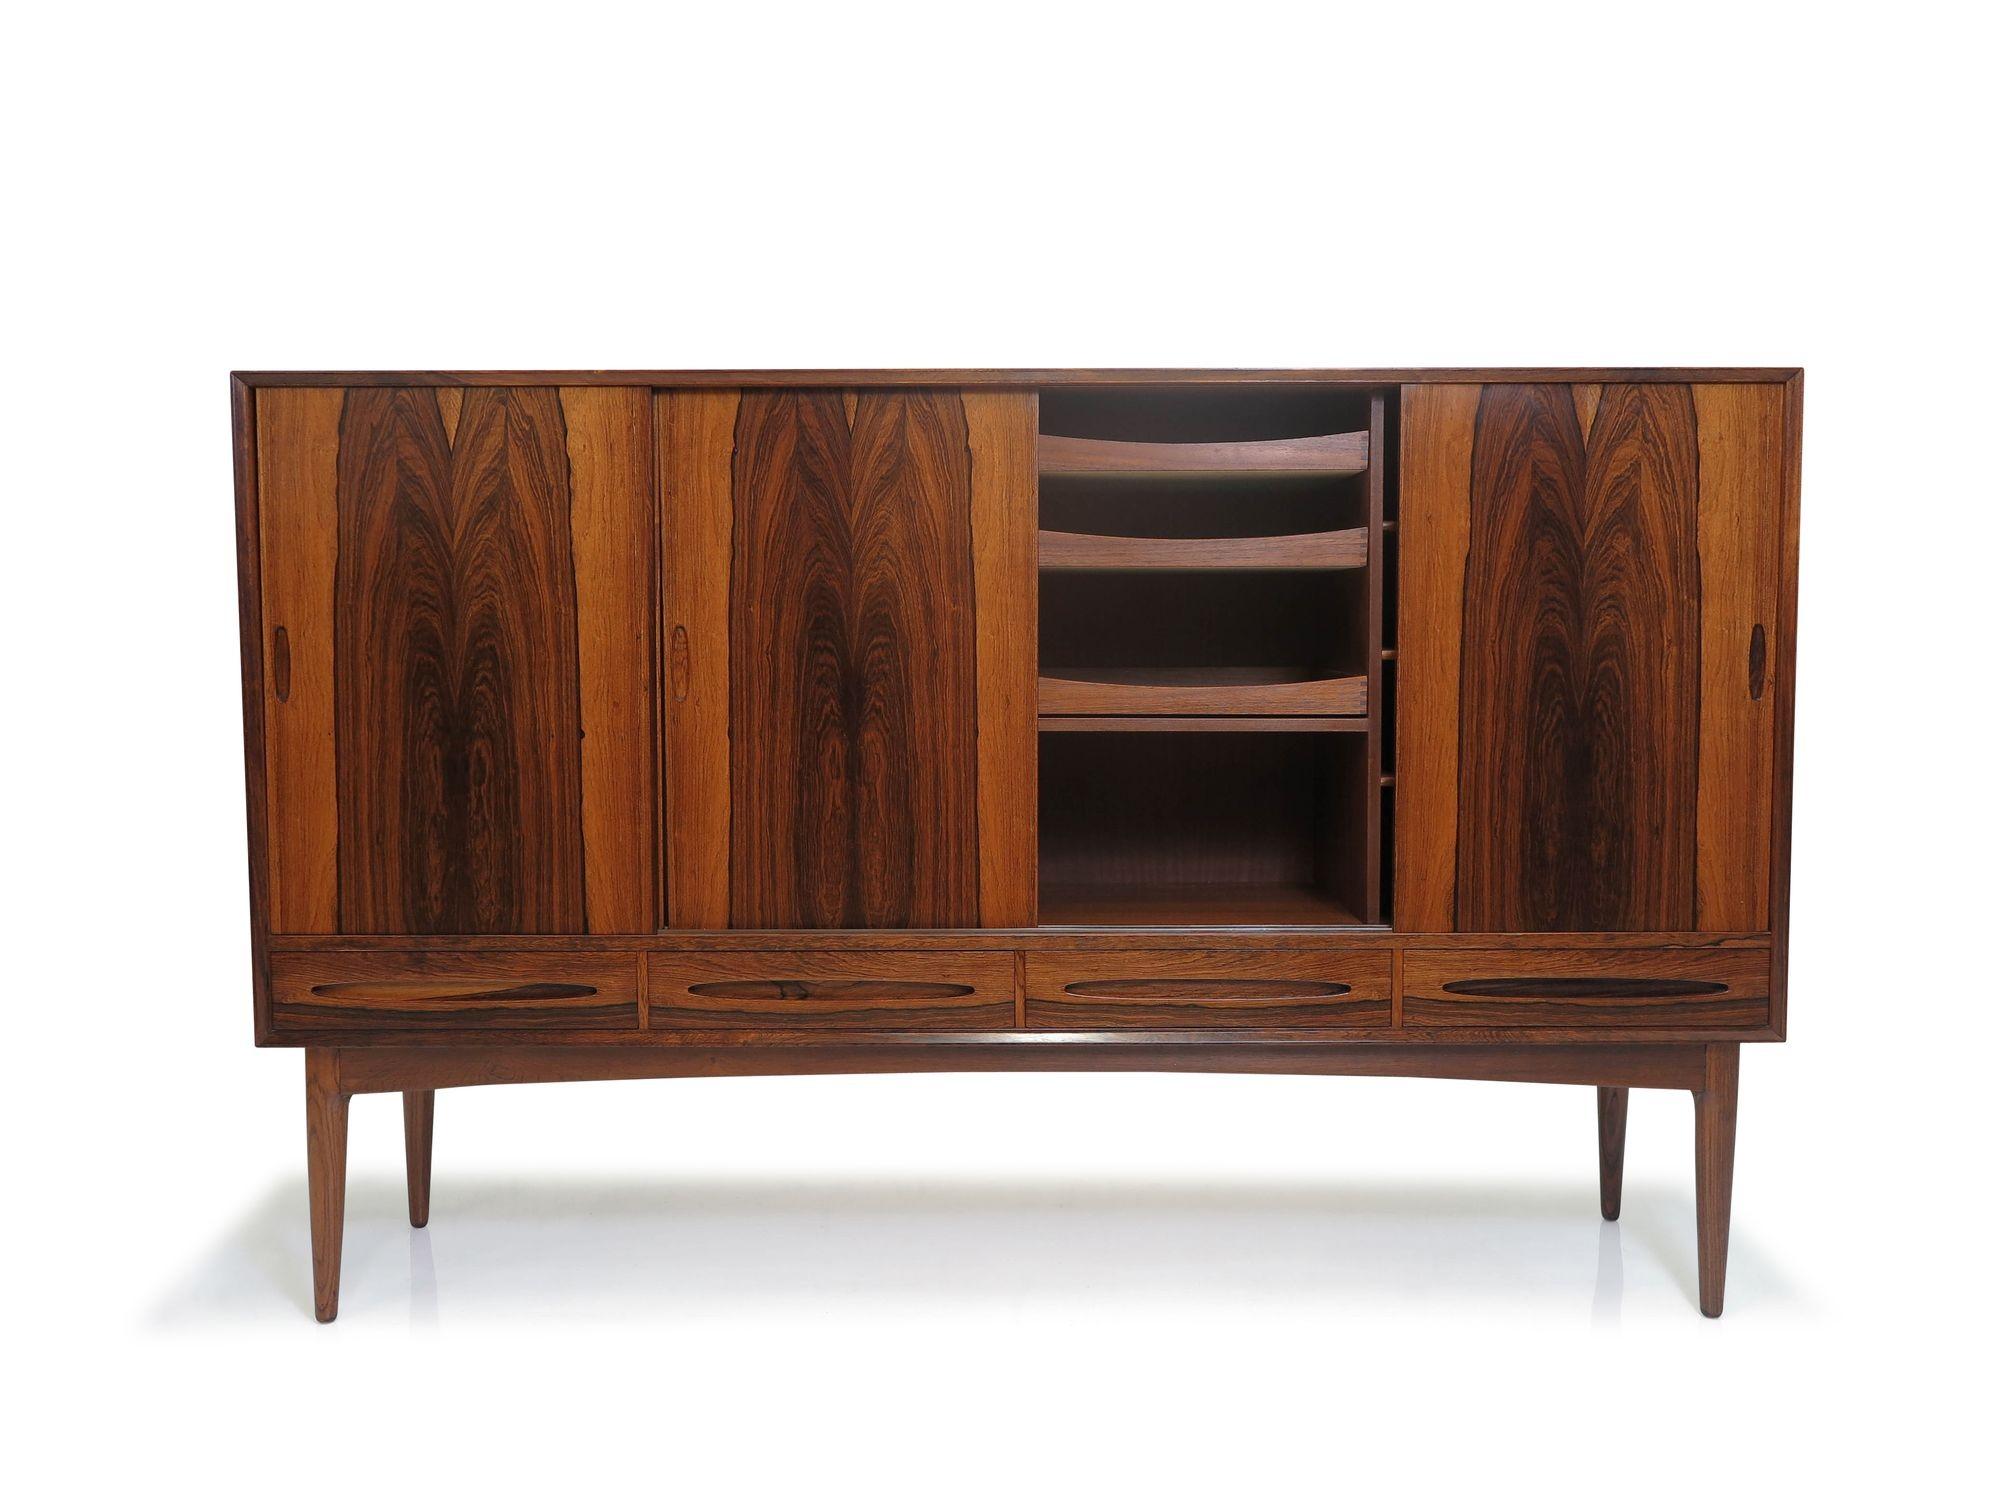 1950's Bruno Hansen Brazilian Rosewood credenza finely crafted with dramatic book-matched grain across four sliding doors each with sculpted and recessed pulls, over four drawers. The doors open to reveal a Cuban mahogany interior with an